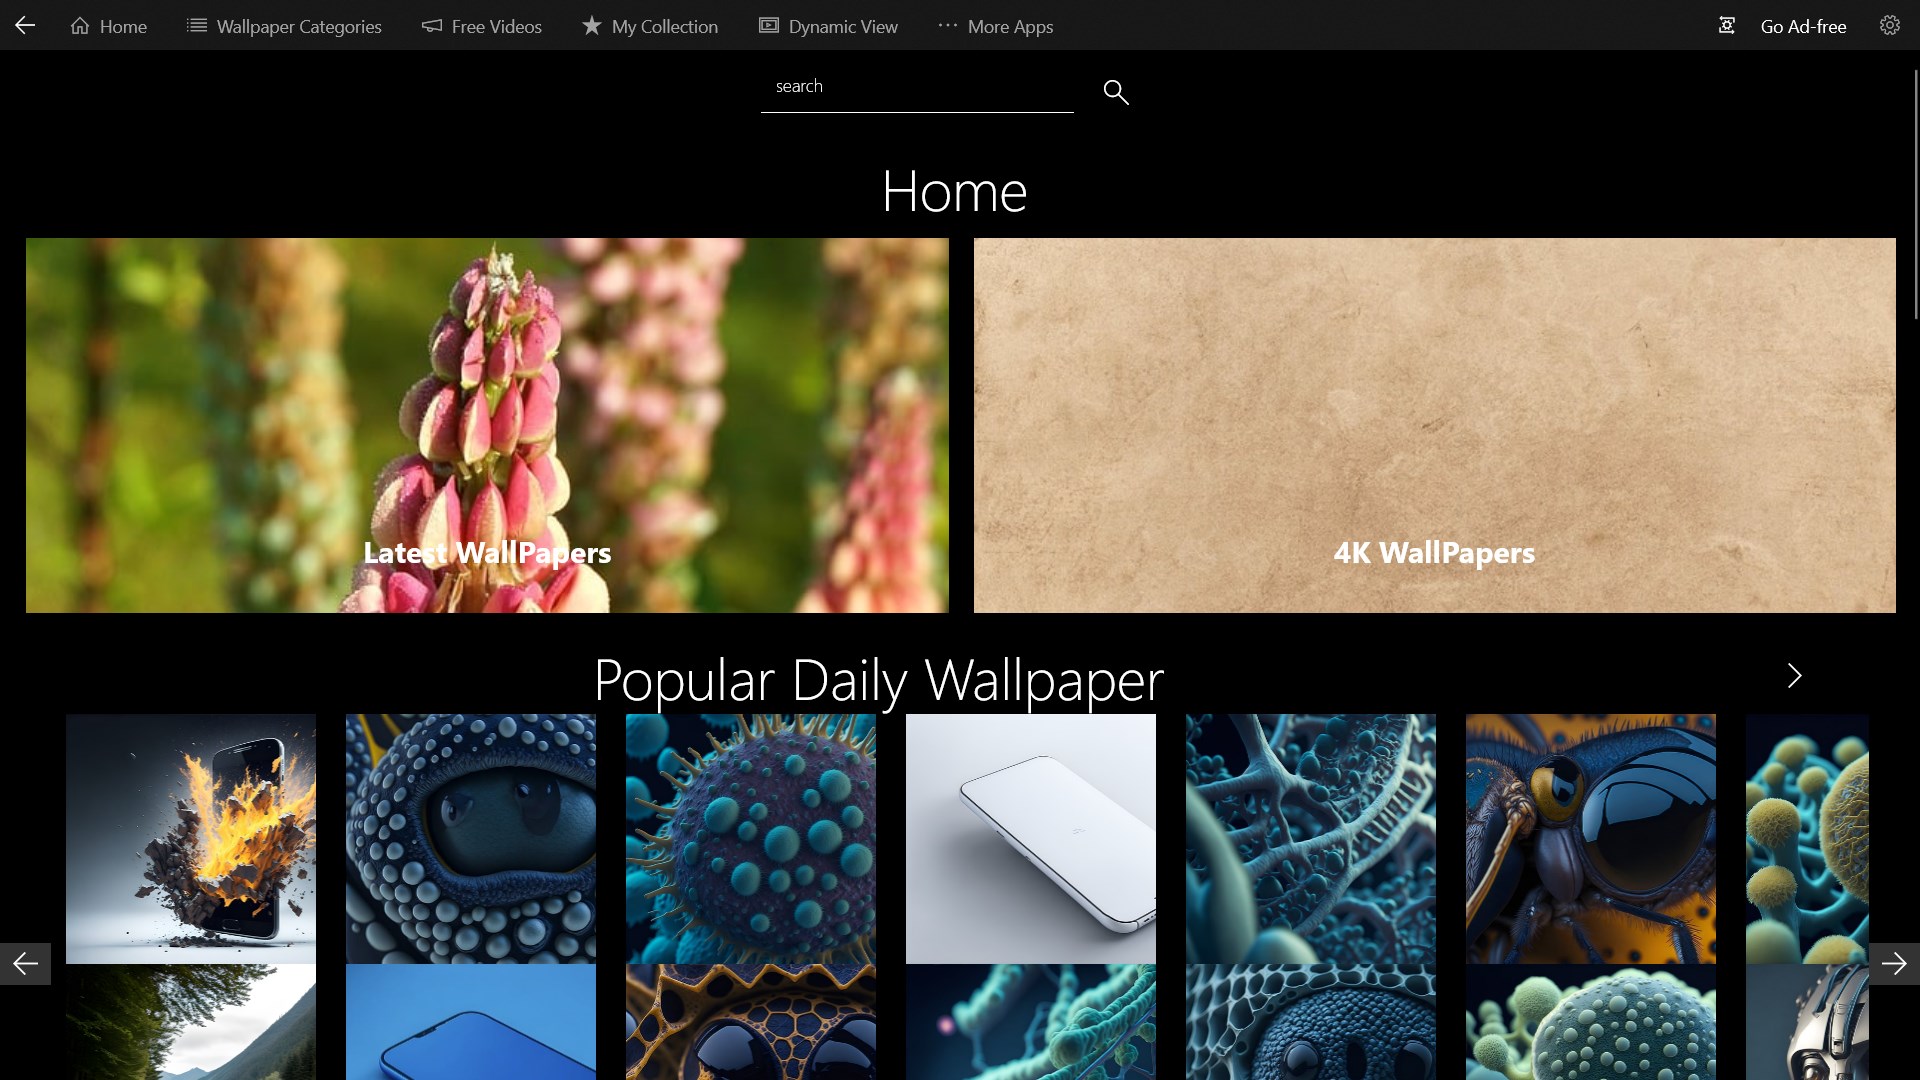 Download 4K Wallpapers Just Released by Microsoft